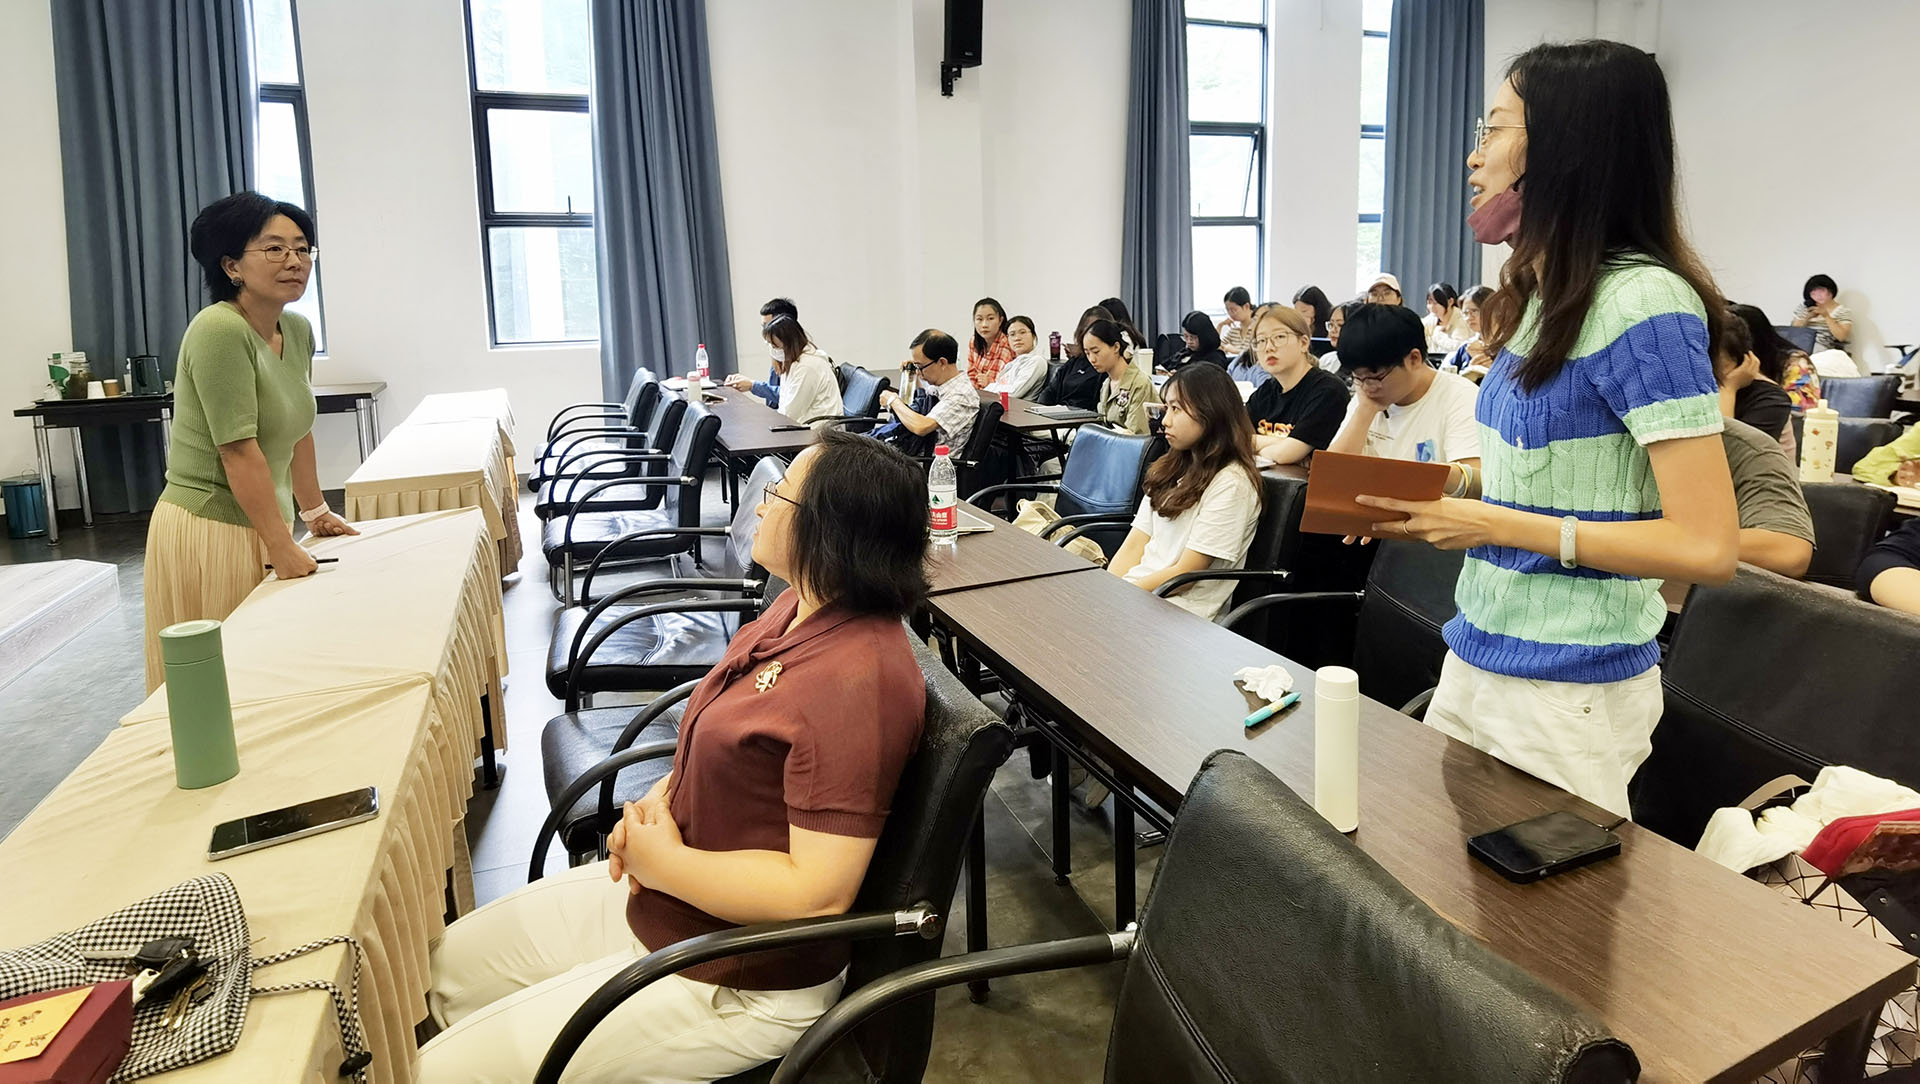 Yawen Li, CSUSB professor of social work (at far left) who presented a talk at Yunnan University, interacts with a member of the audience at the July 10 program.